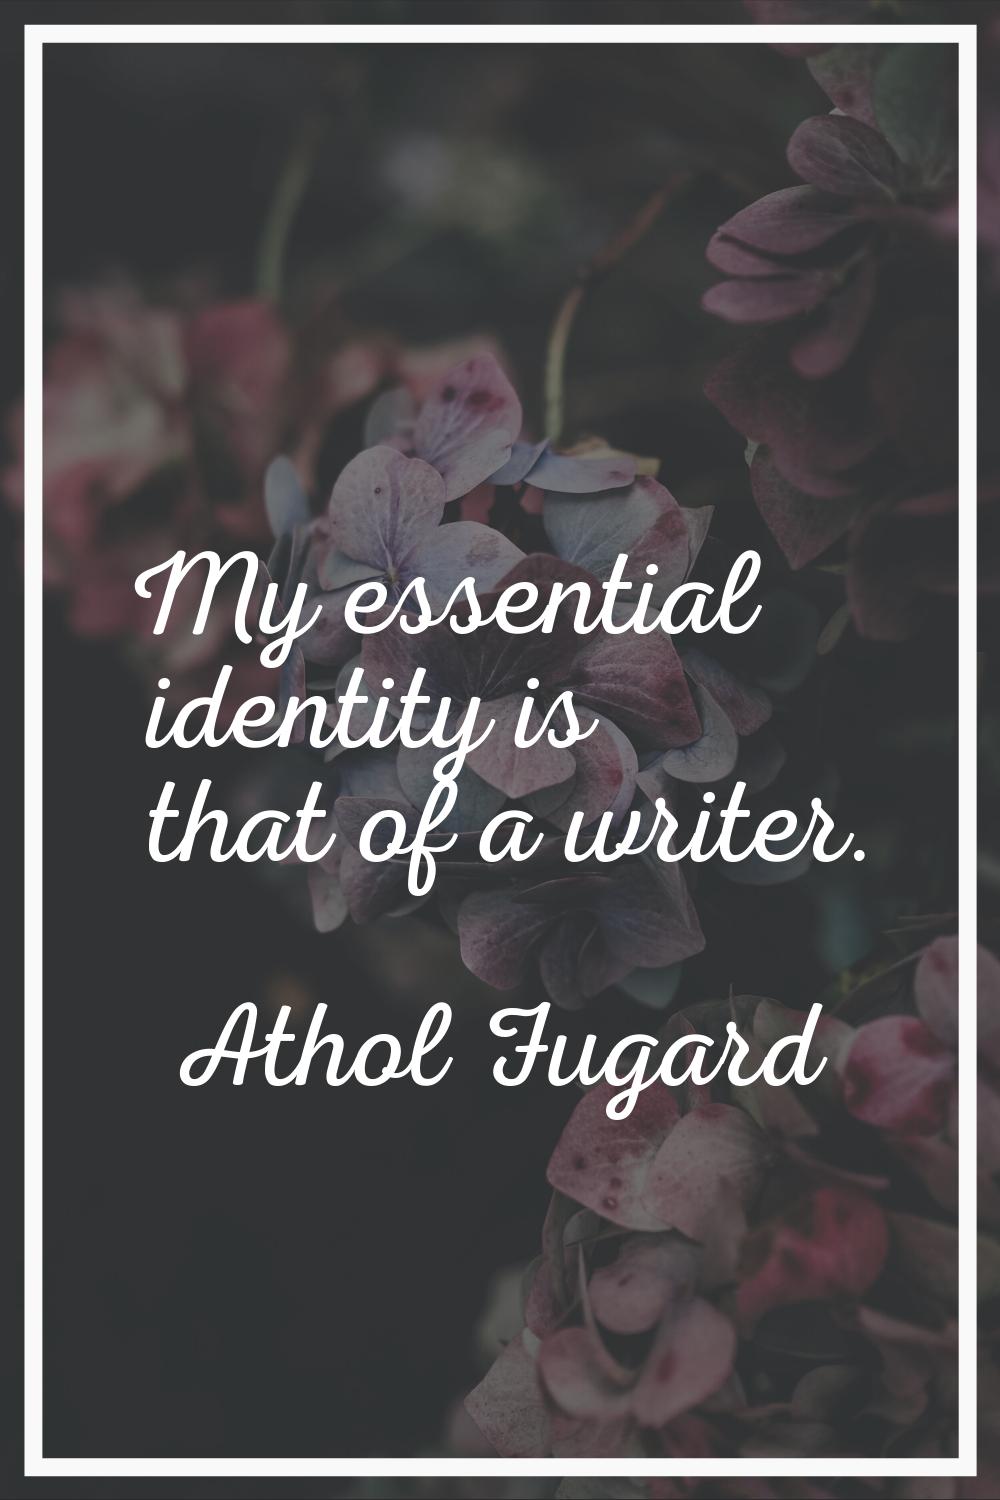 My essential identity is that of a writer.